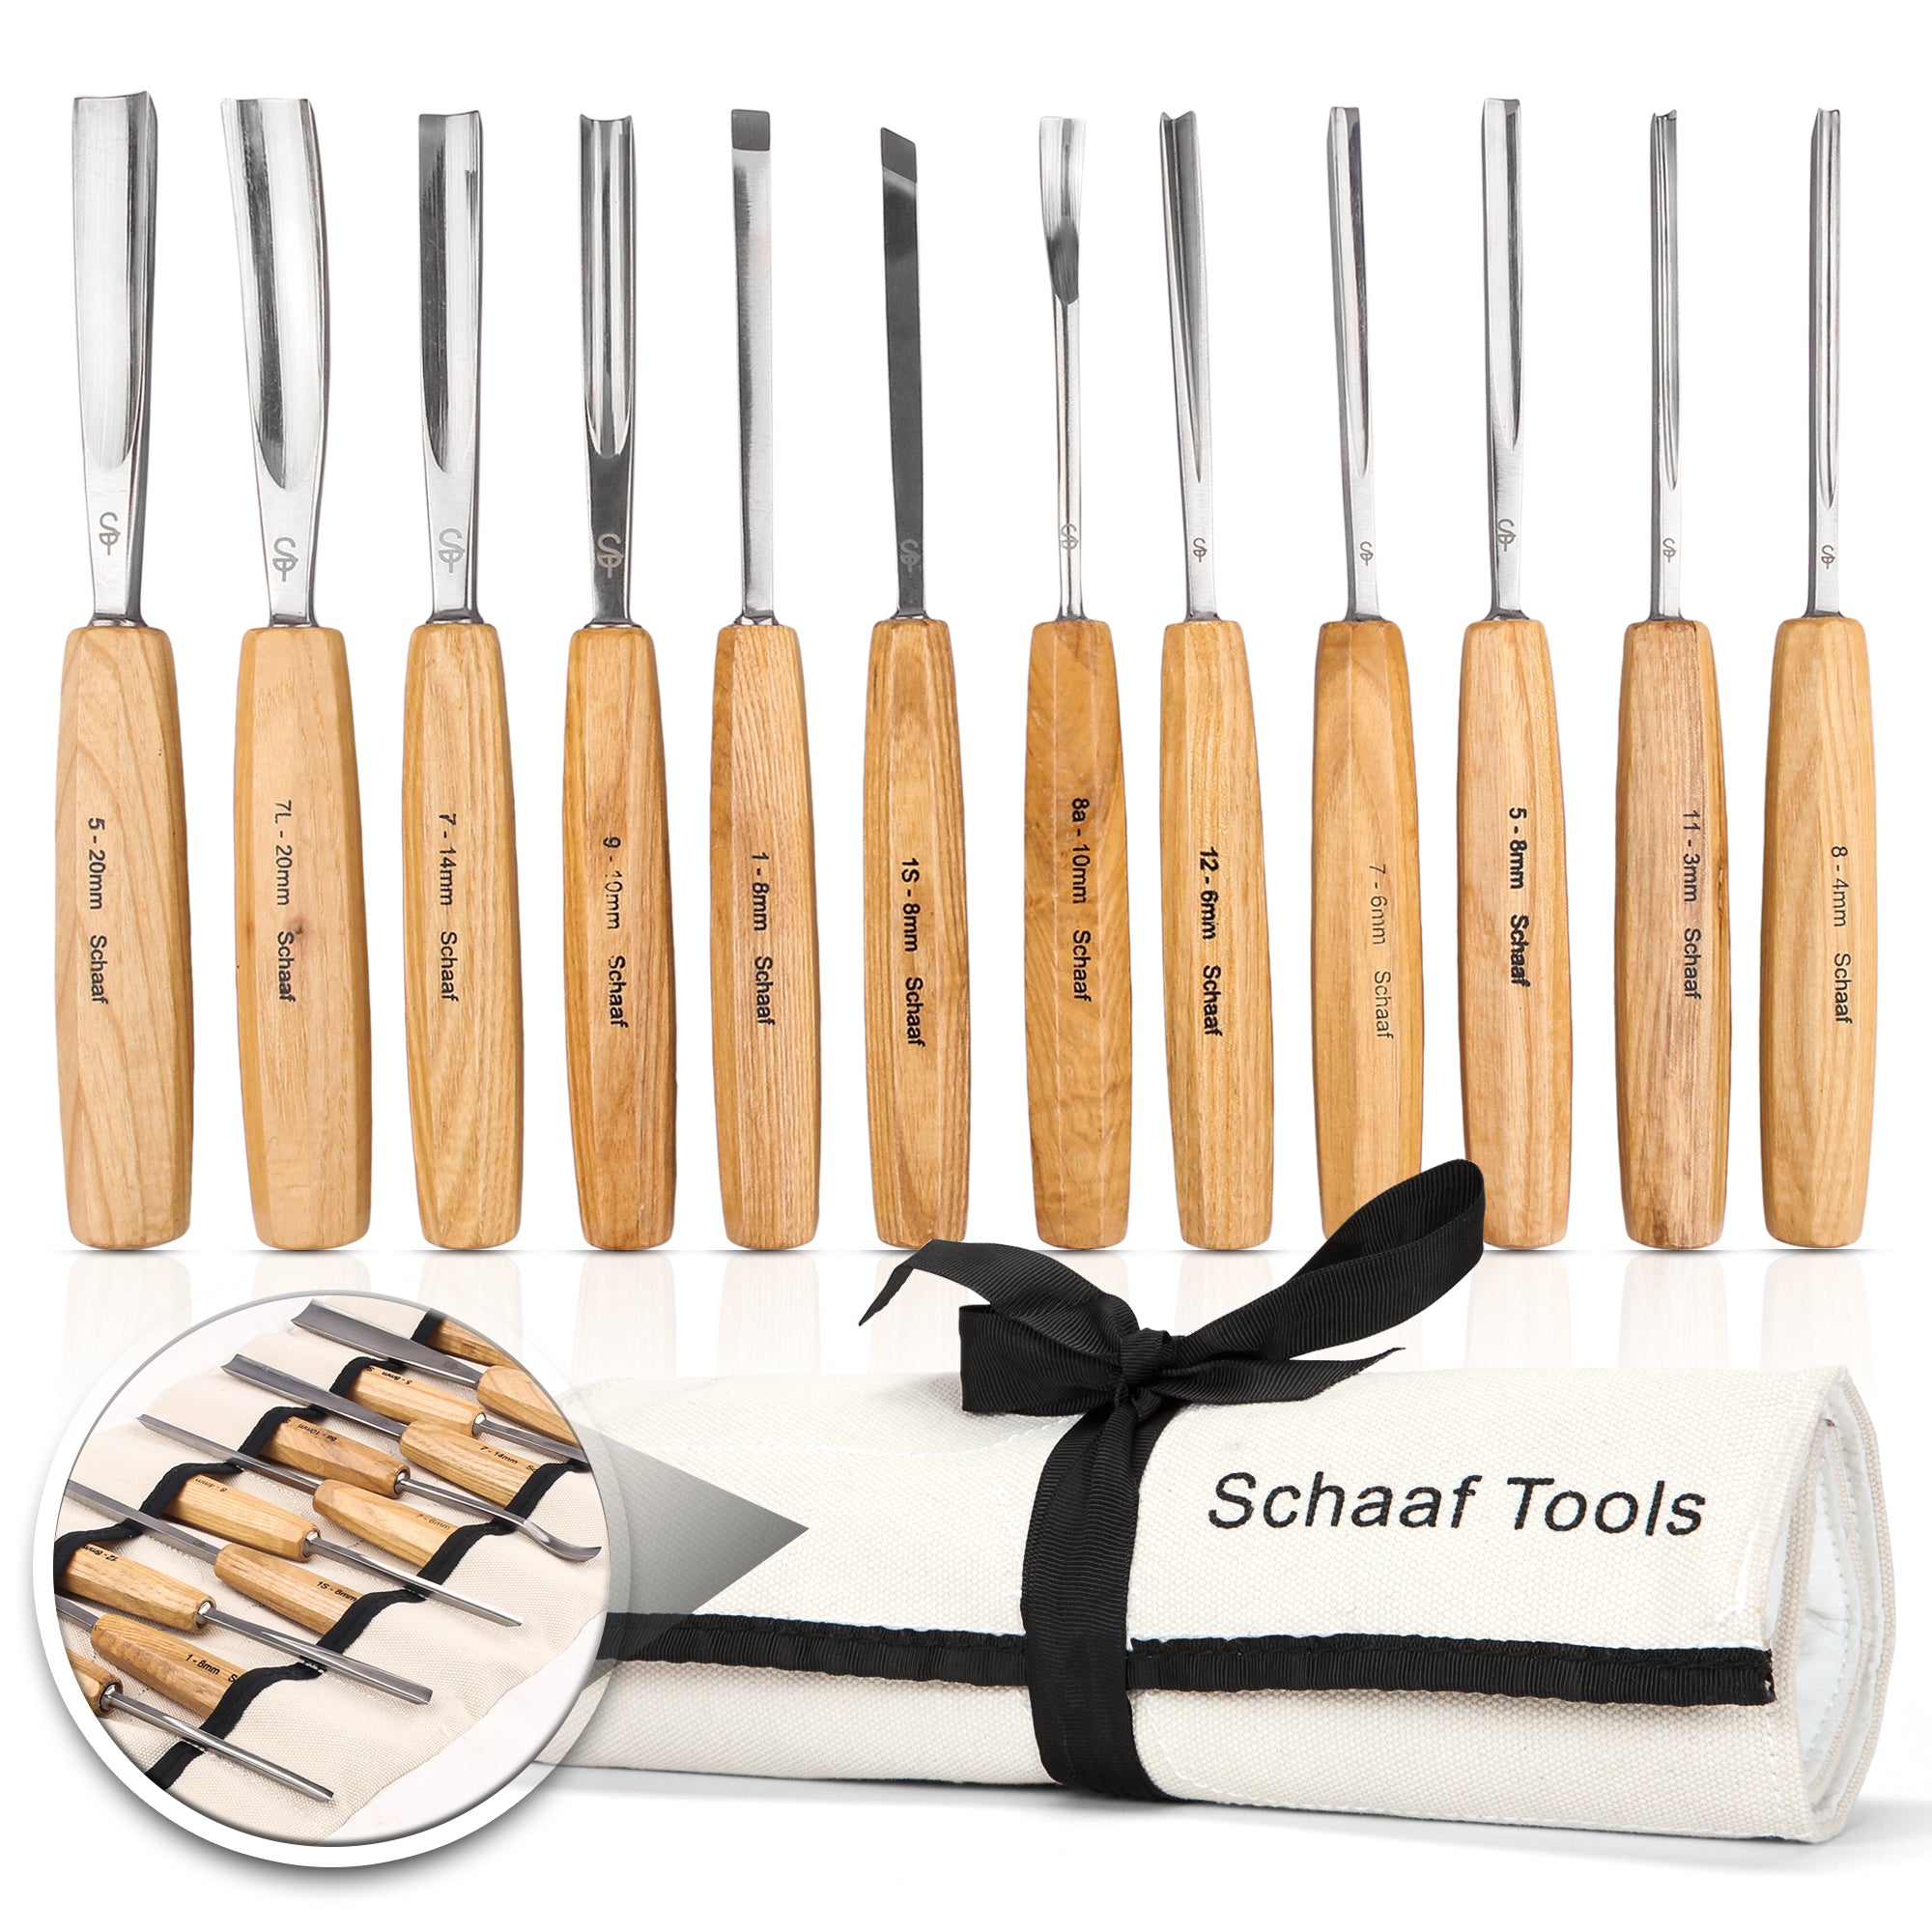 what are the best wood carving tools for beginners?